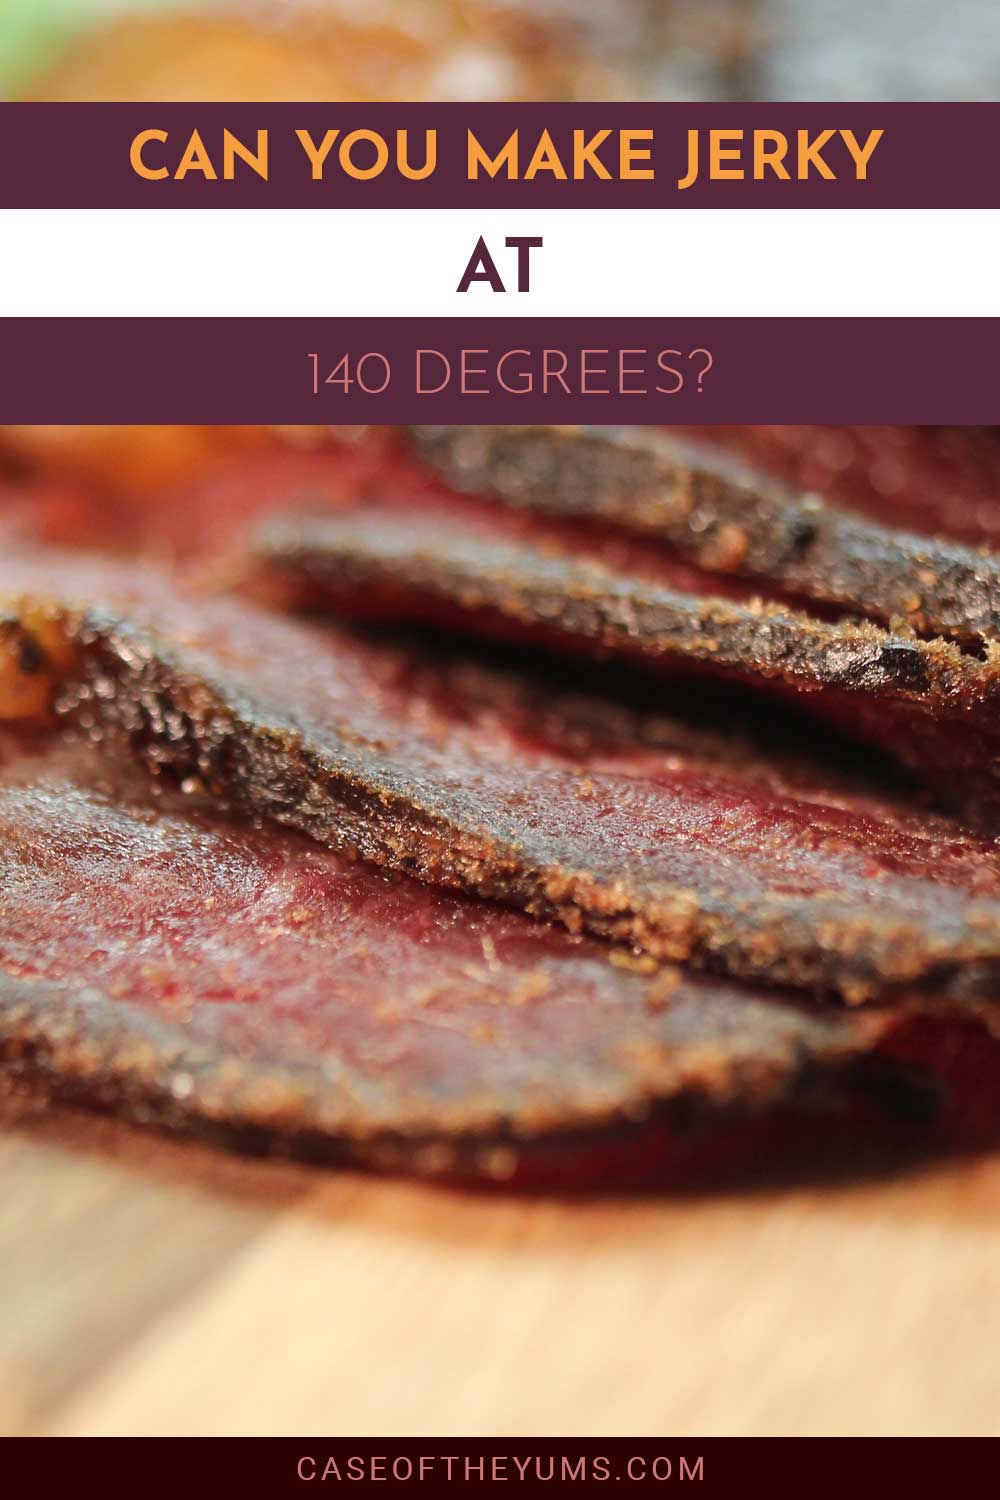 Jerky slices on a wooden surface - Can You Make them At 140 Degrees?